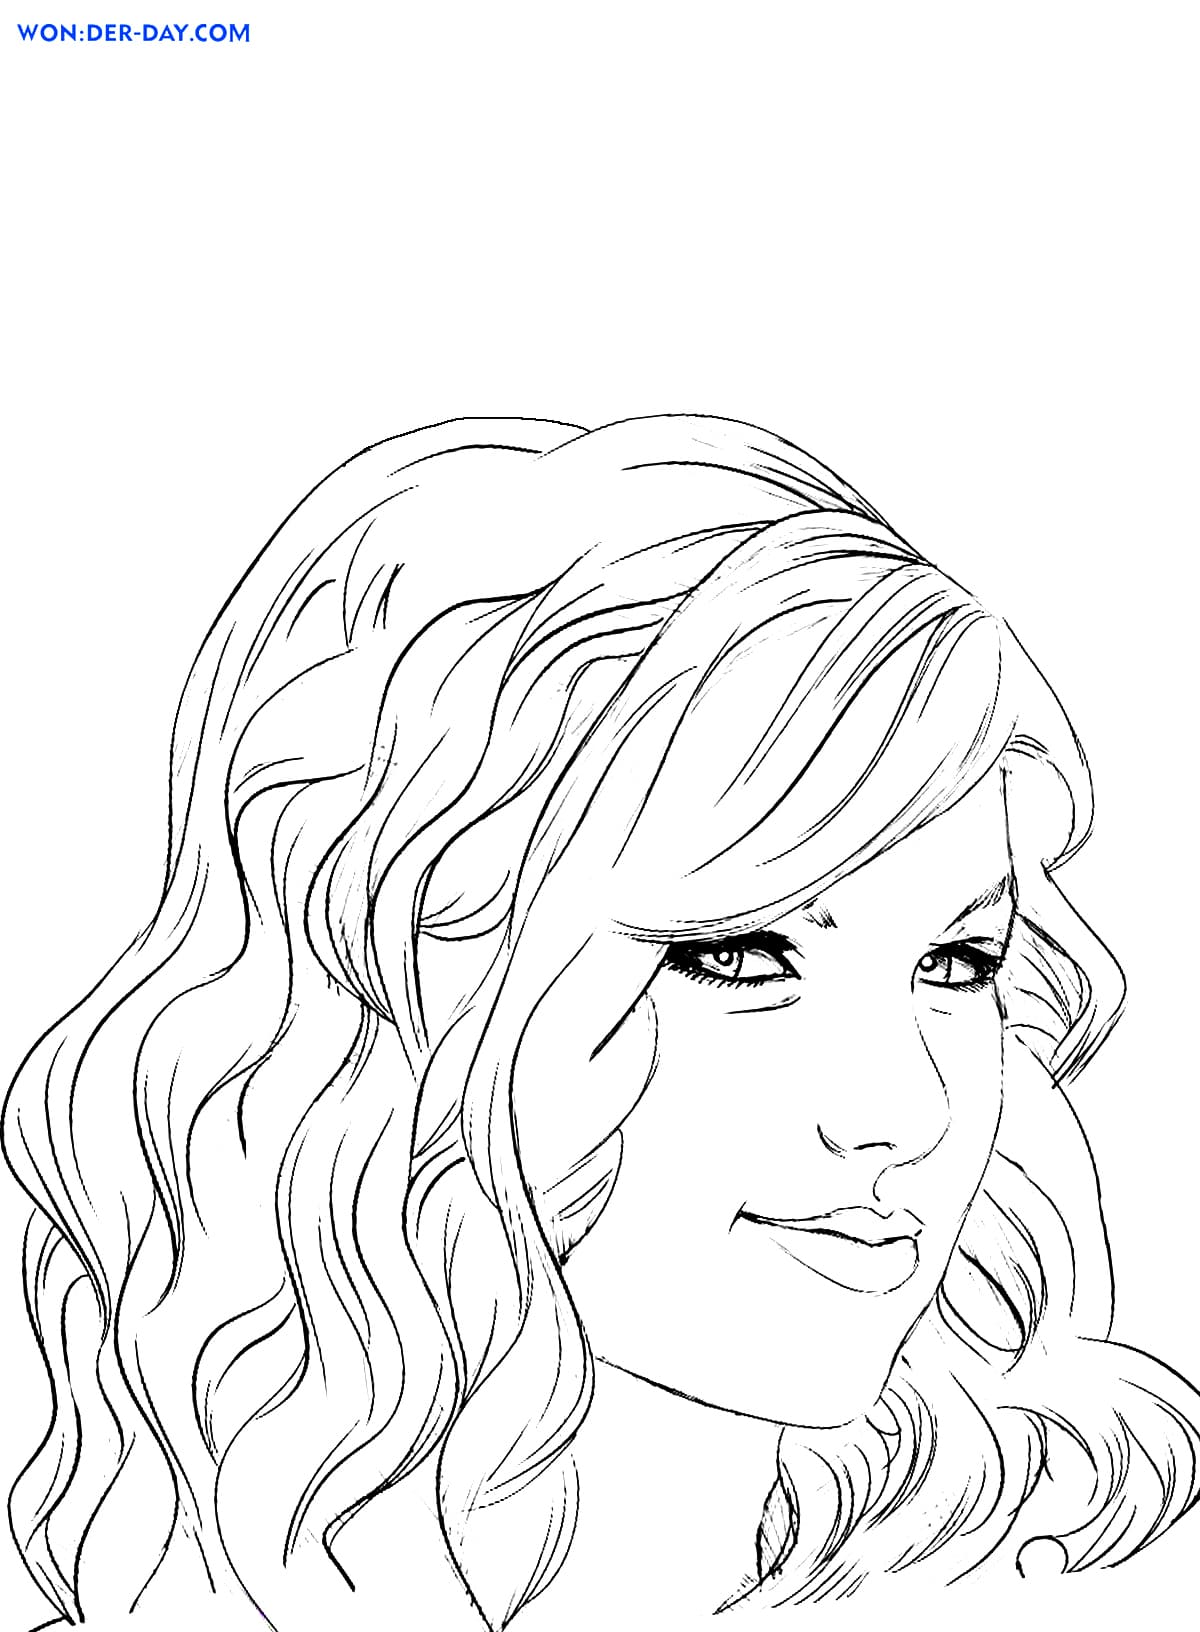 Taylor Swift Coloring Pages Print For Free Wonder Day Coloring Pages For Children And Adults - brooding black hair roblox